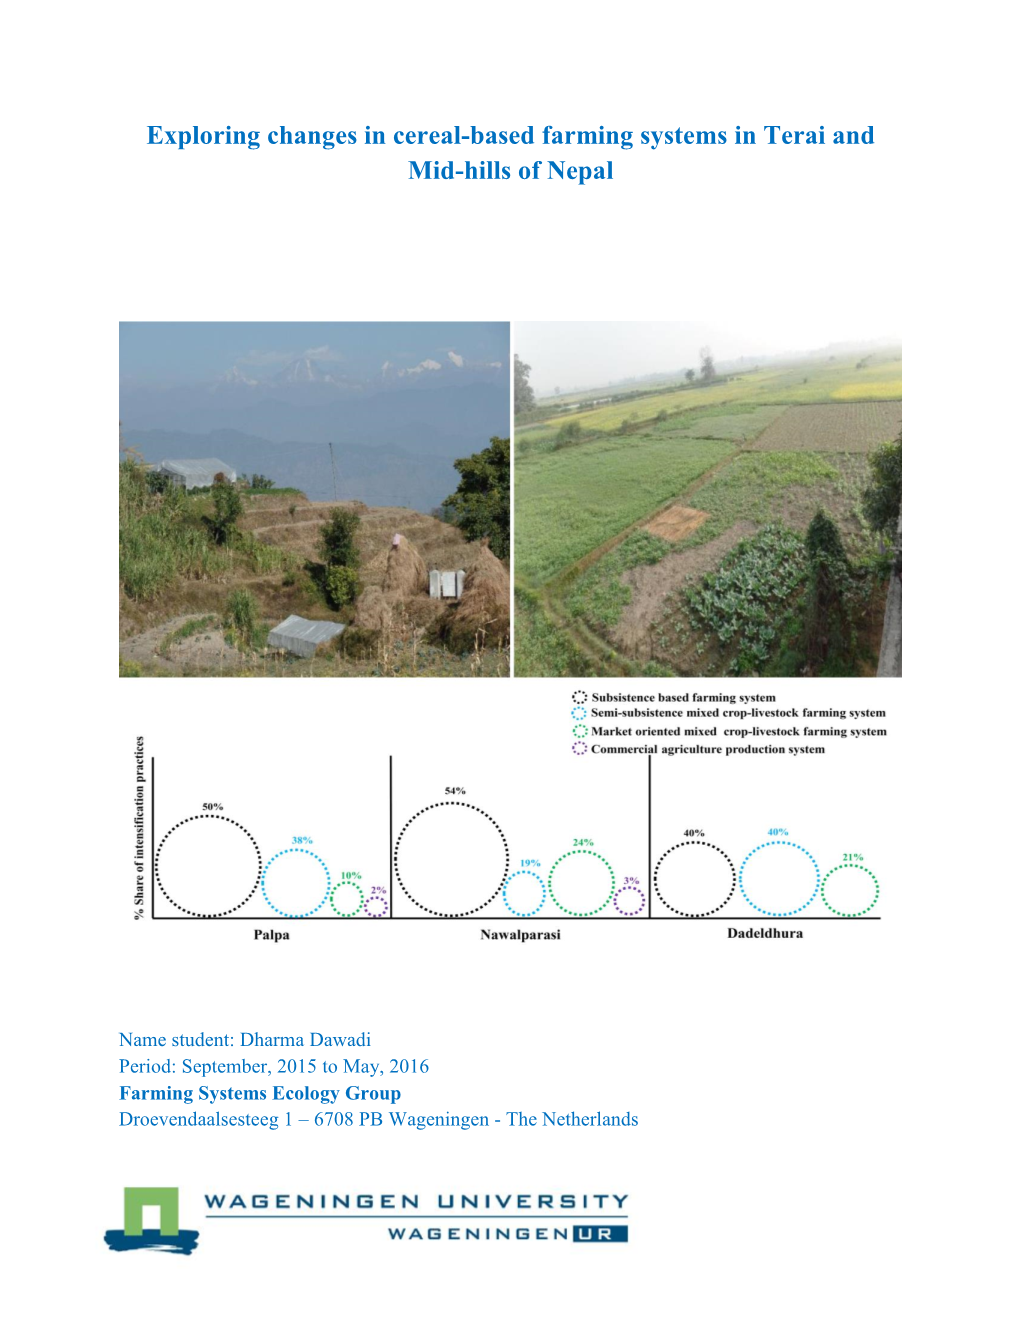 Exploring Changes in Cereal-Based Farming Systems in Terai and Mid-Hills of Nepal